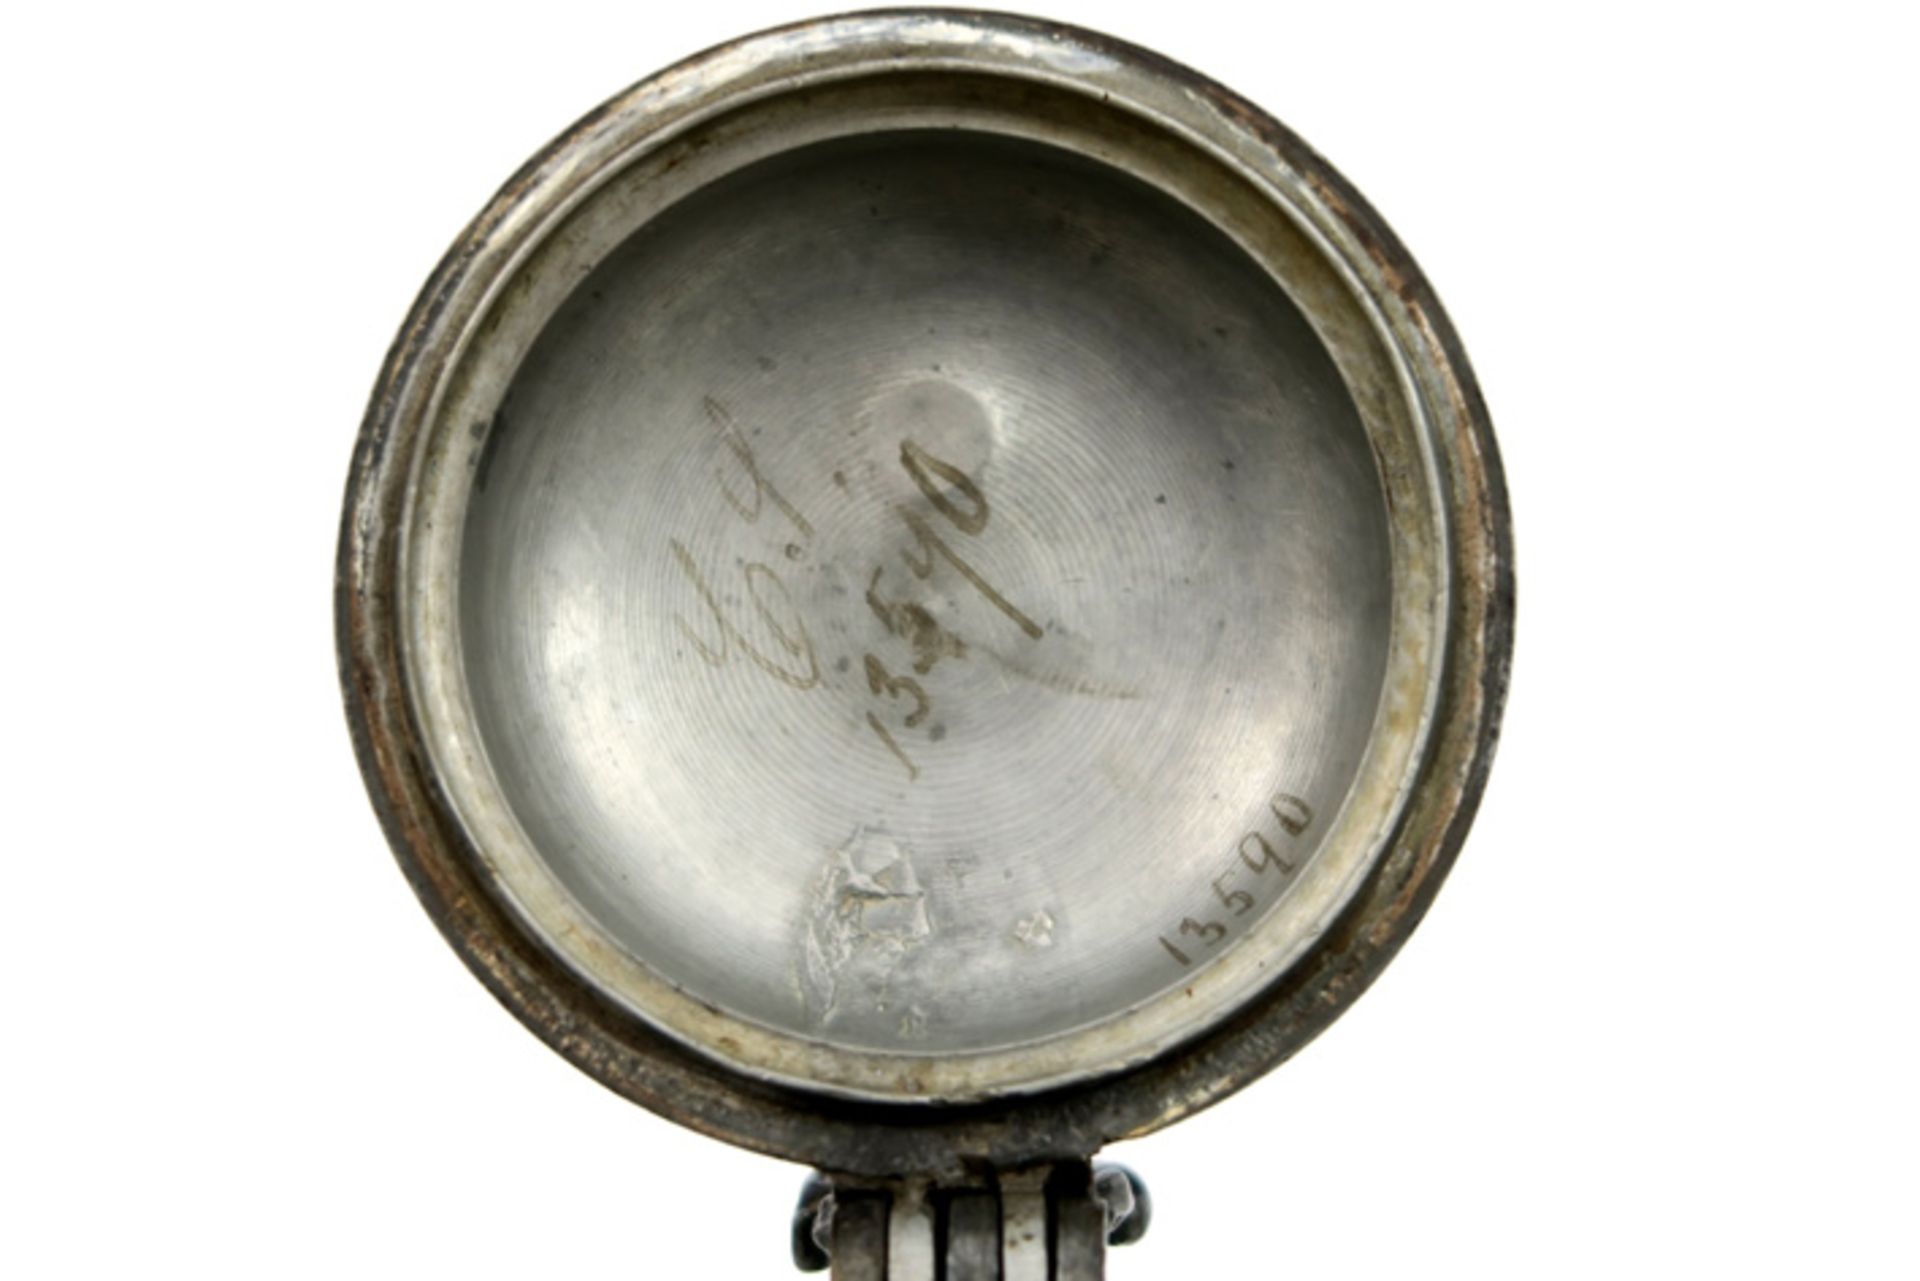 two quite rare 18th Cent. Swiss' "Stegkanne" from Bern in pewter, one marked Abraham Ganting (ca - Image 3 of 6